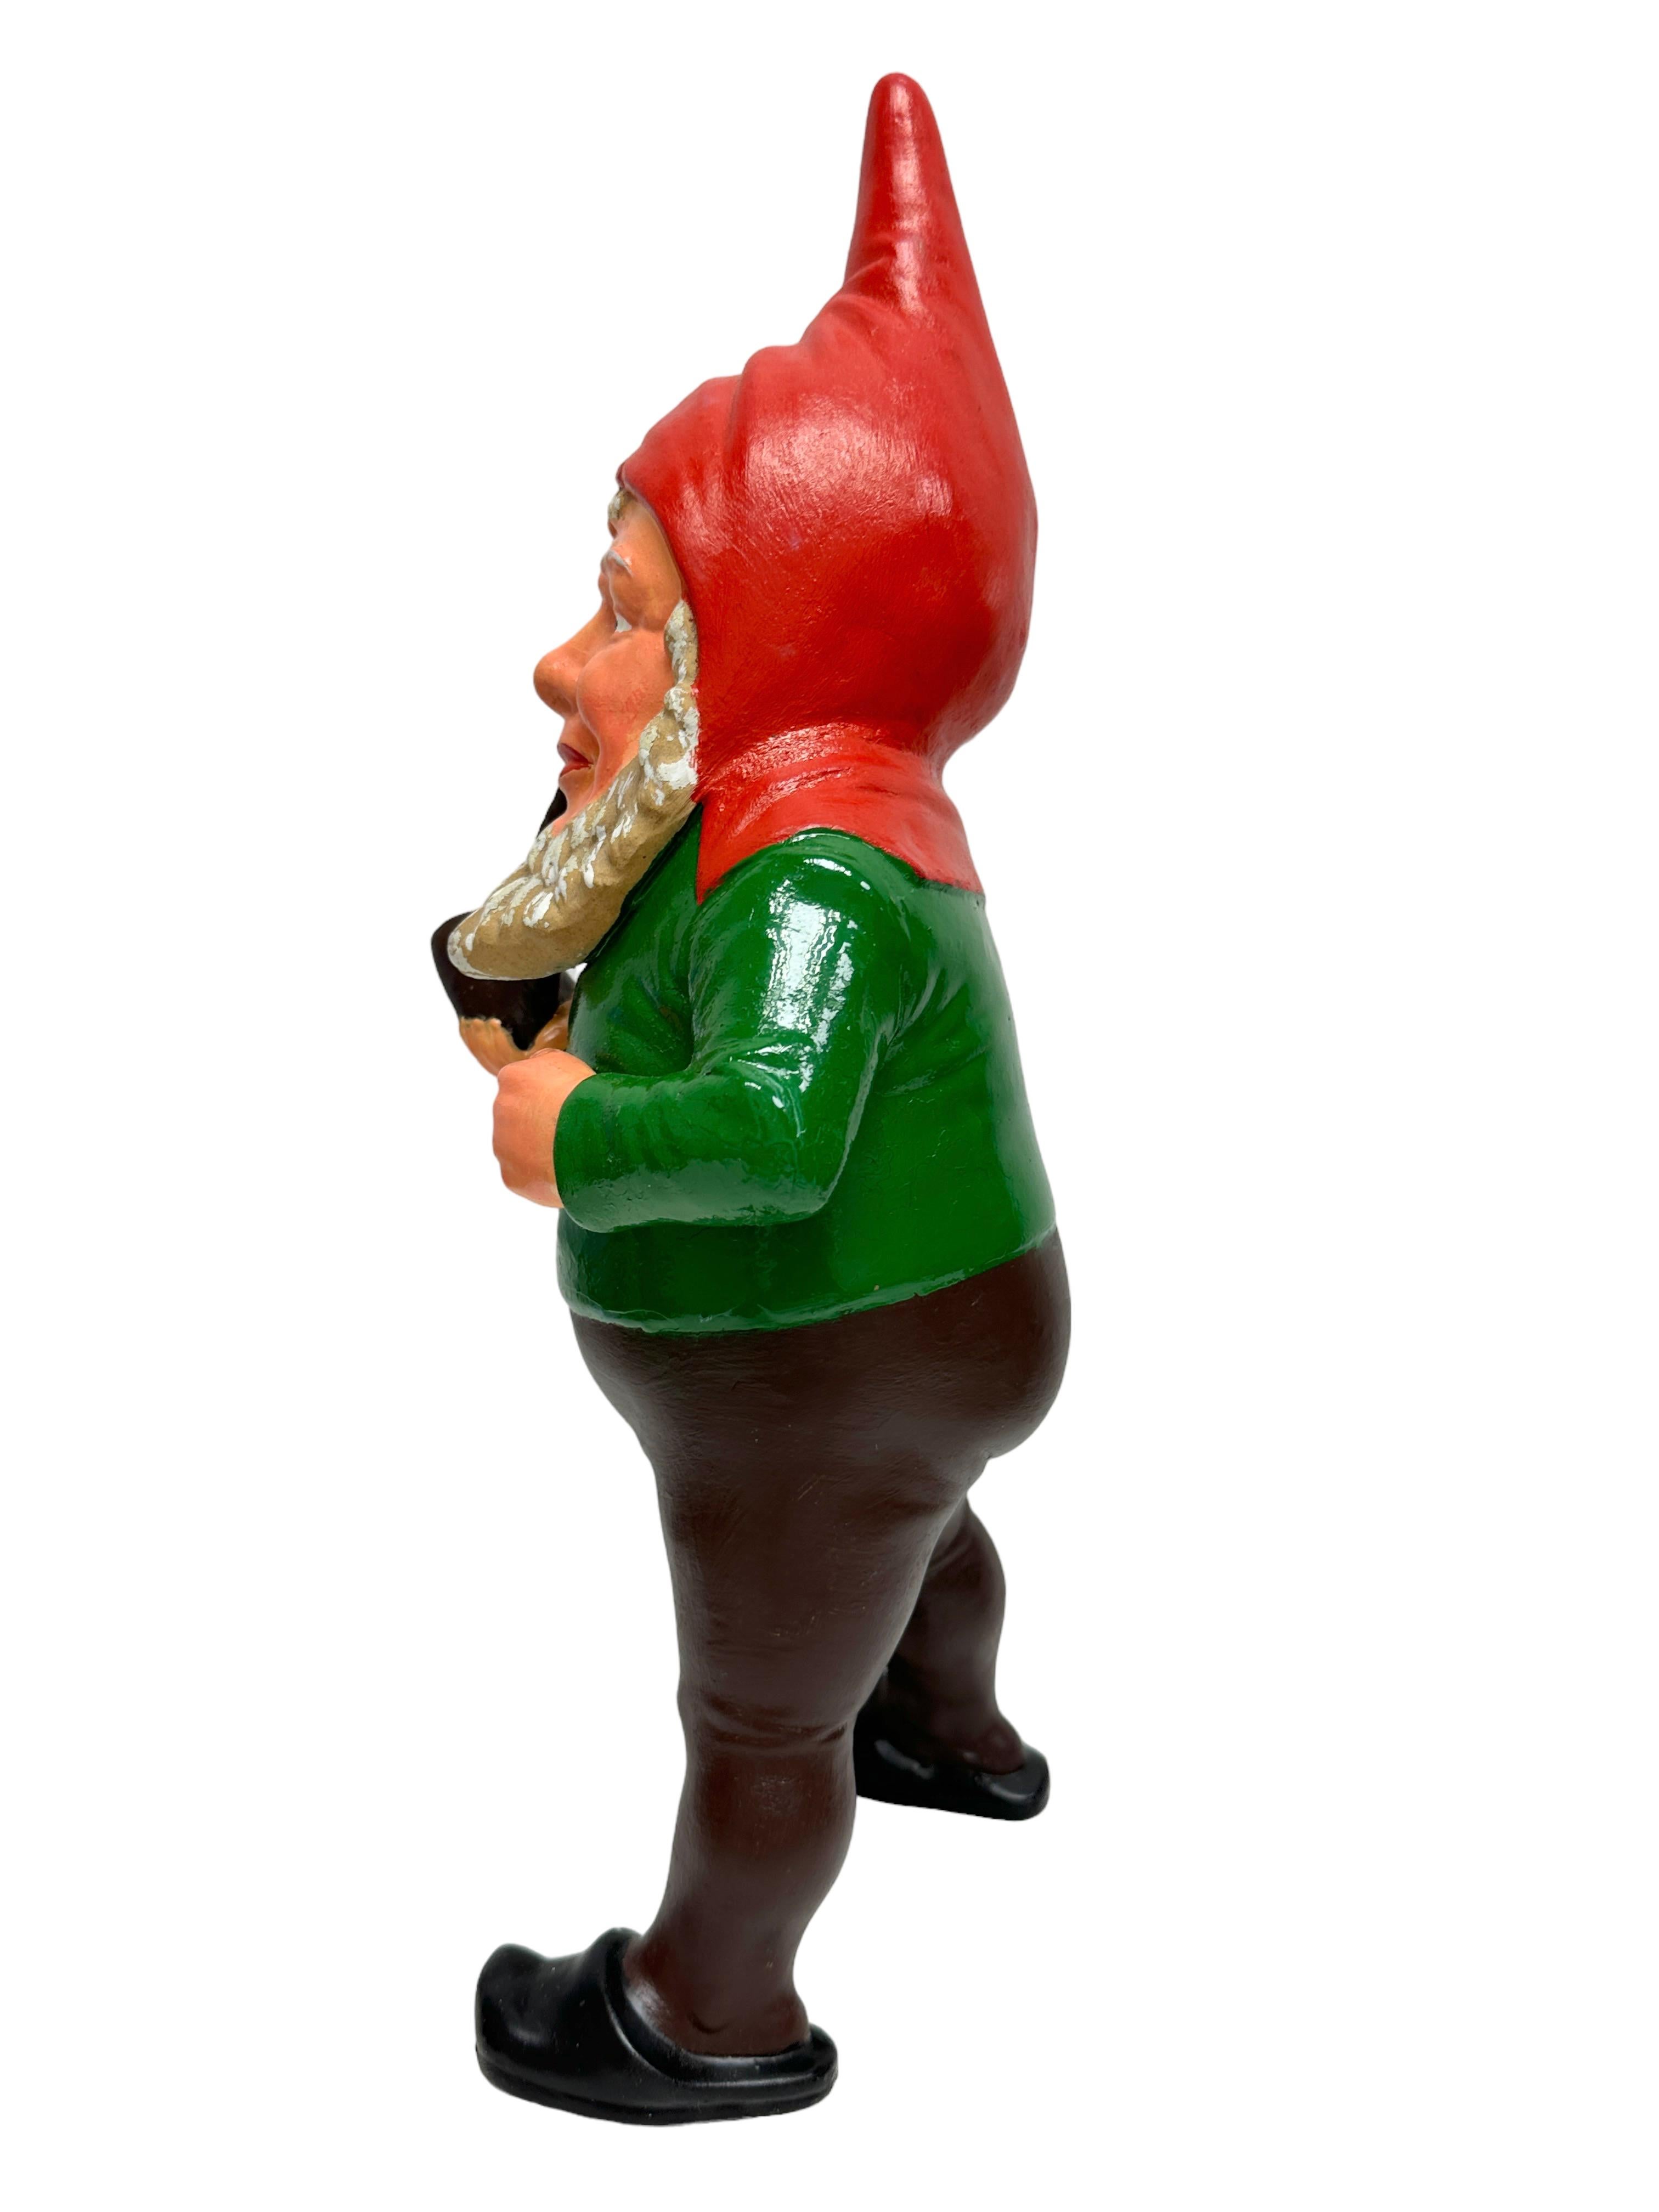 A gorgeous character ceramic figural gnome statue. This character statue has been made in Germany, in the 1920s or older. Absolutely gorgeous item with lots of character and still in good, used condition, without damage. Some paint lost, but this is